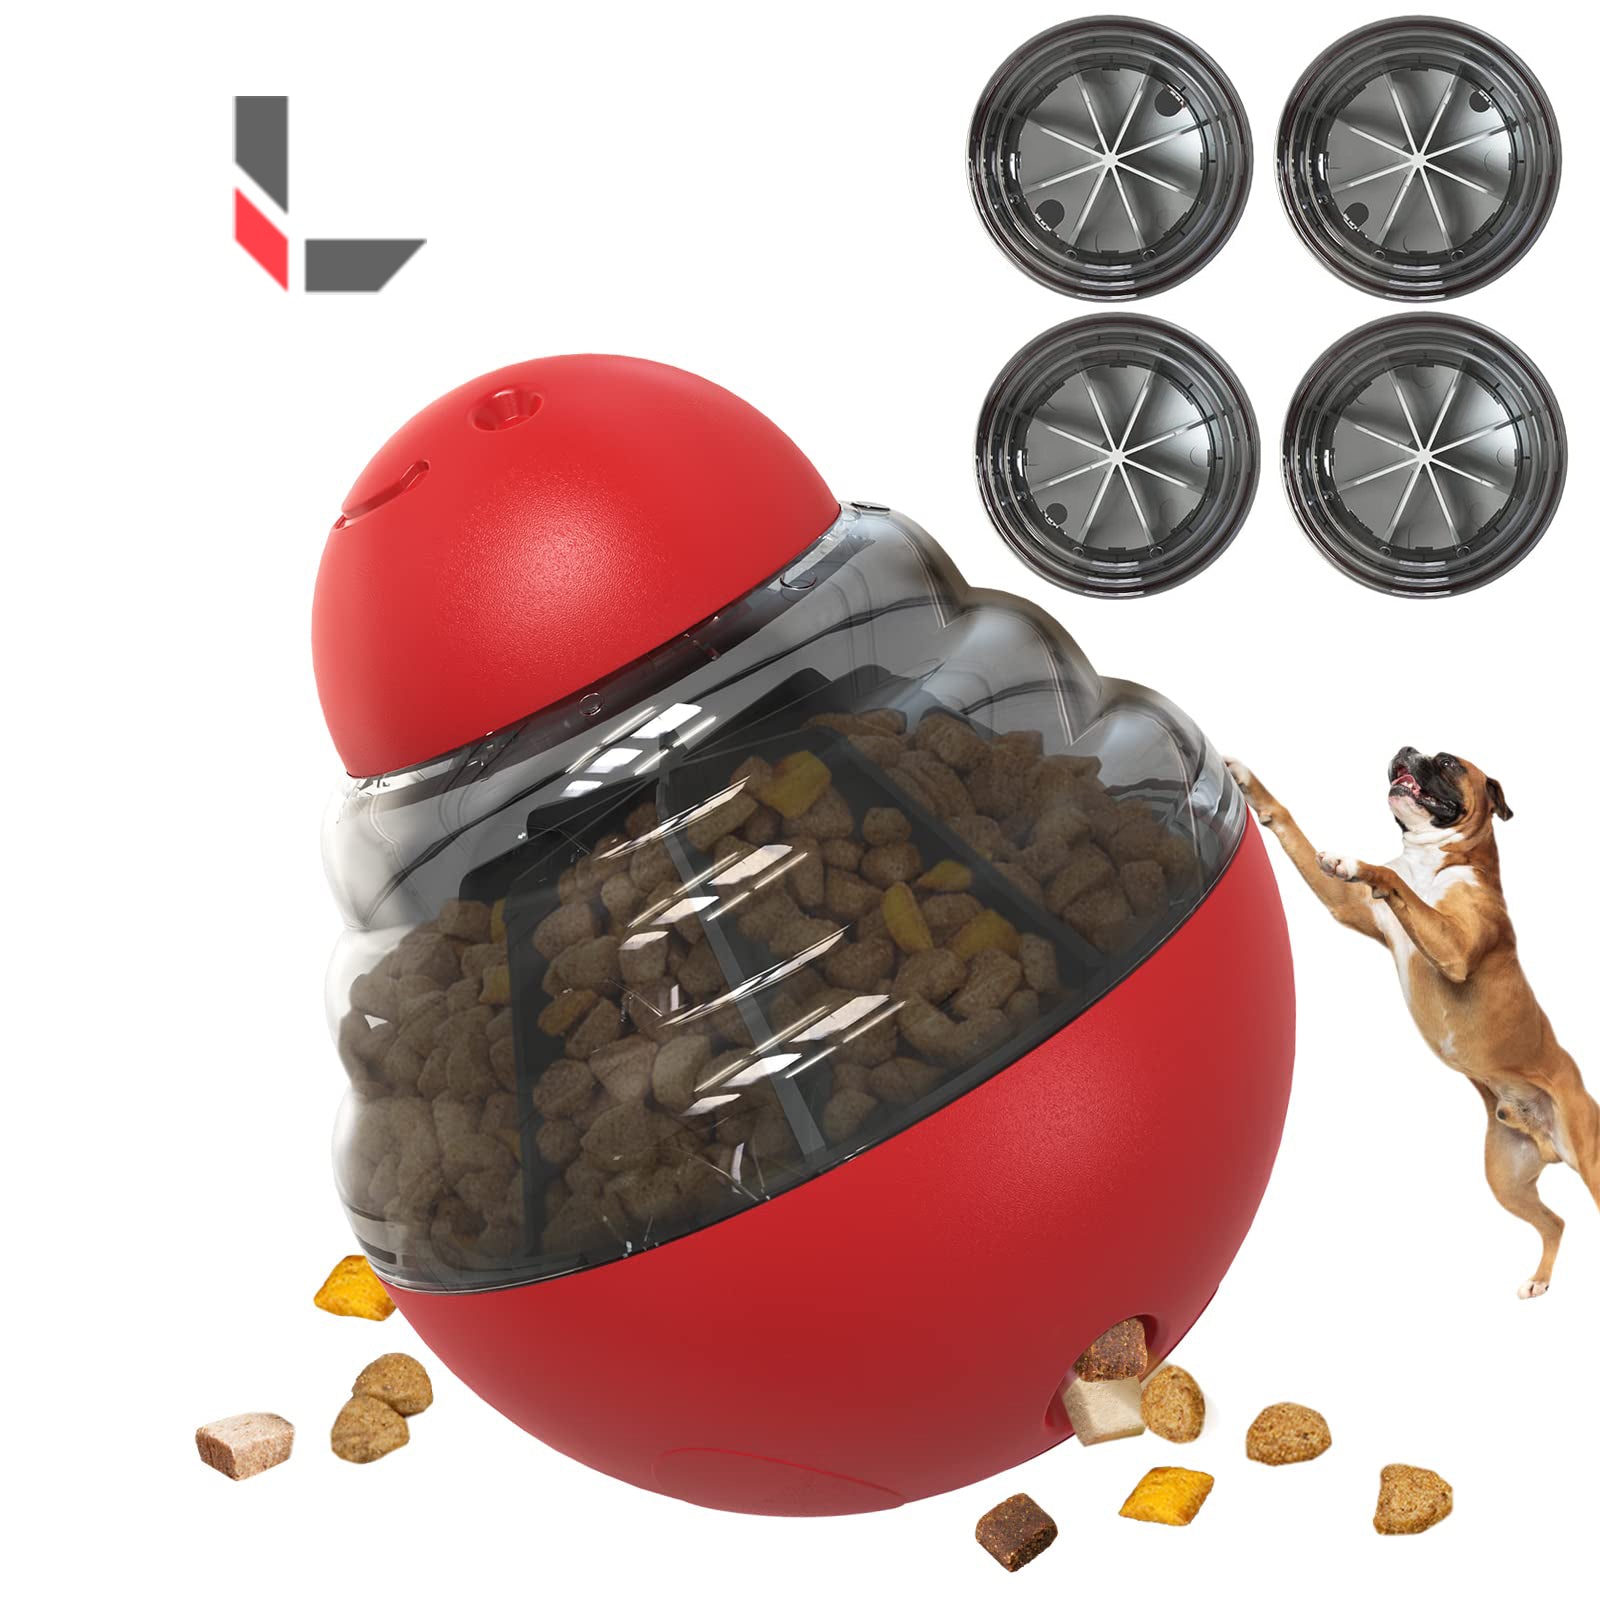 KADTC Dog Tower/Balls Slow Feeder Puzzles Bowl Adjustable Food Dispensing Toys Brain Mental Stimulation Treat Dispenser Feeding Indestructible Toy Only for Medium/Large Dogs Aggressive Chewers Breed